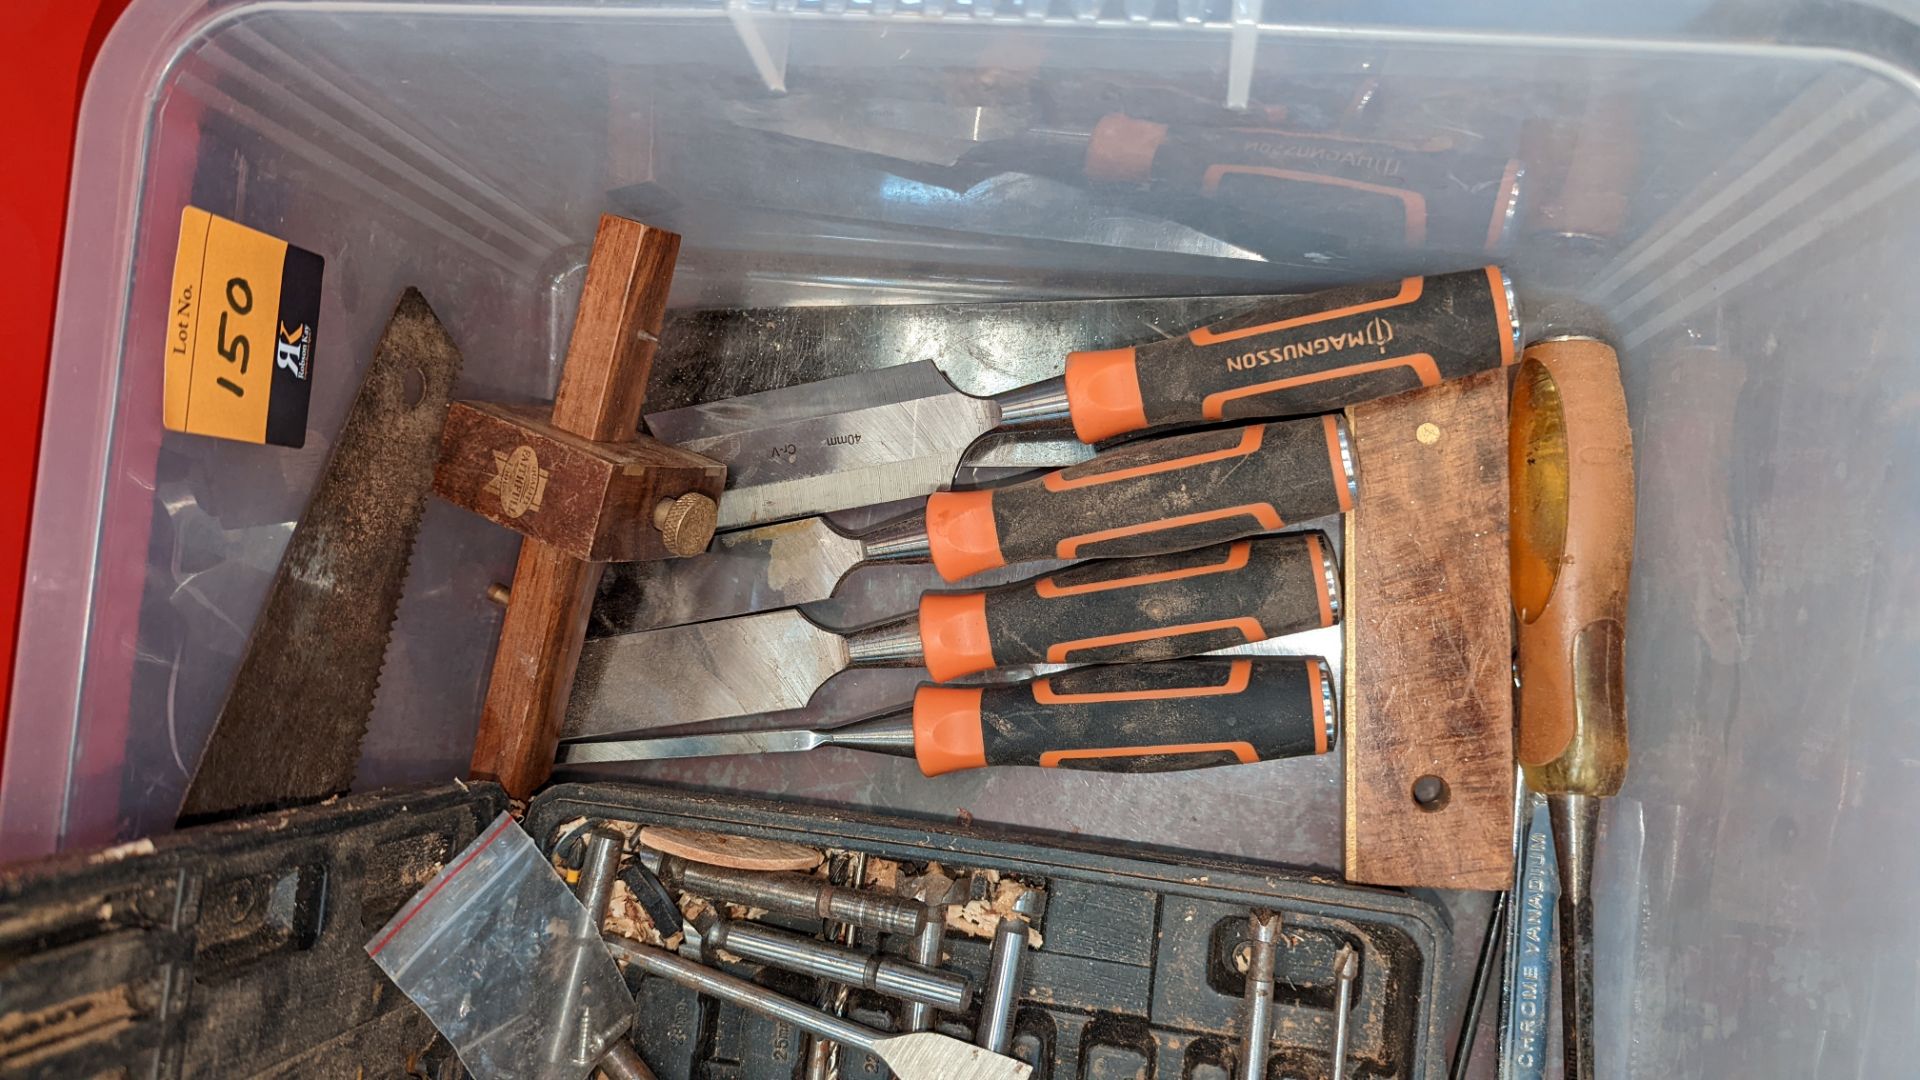 Contents of a crate of hand tools & miscellaneous - crate excluded - Image 5 of 7